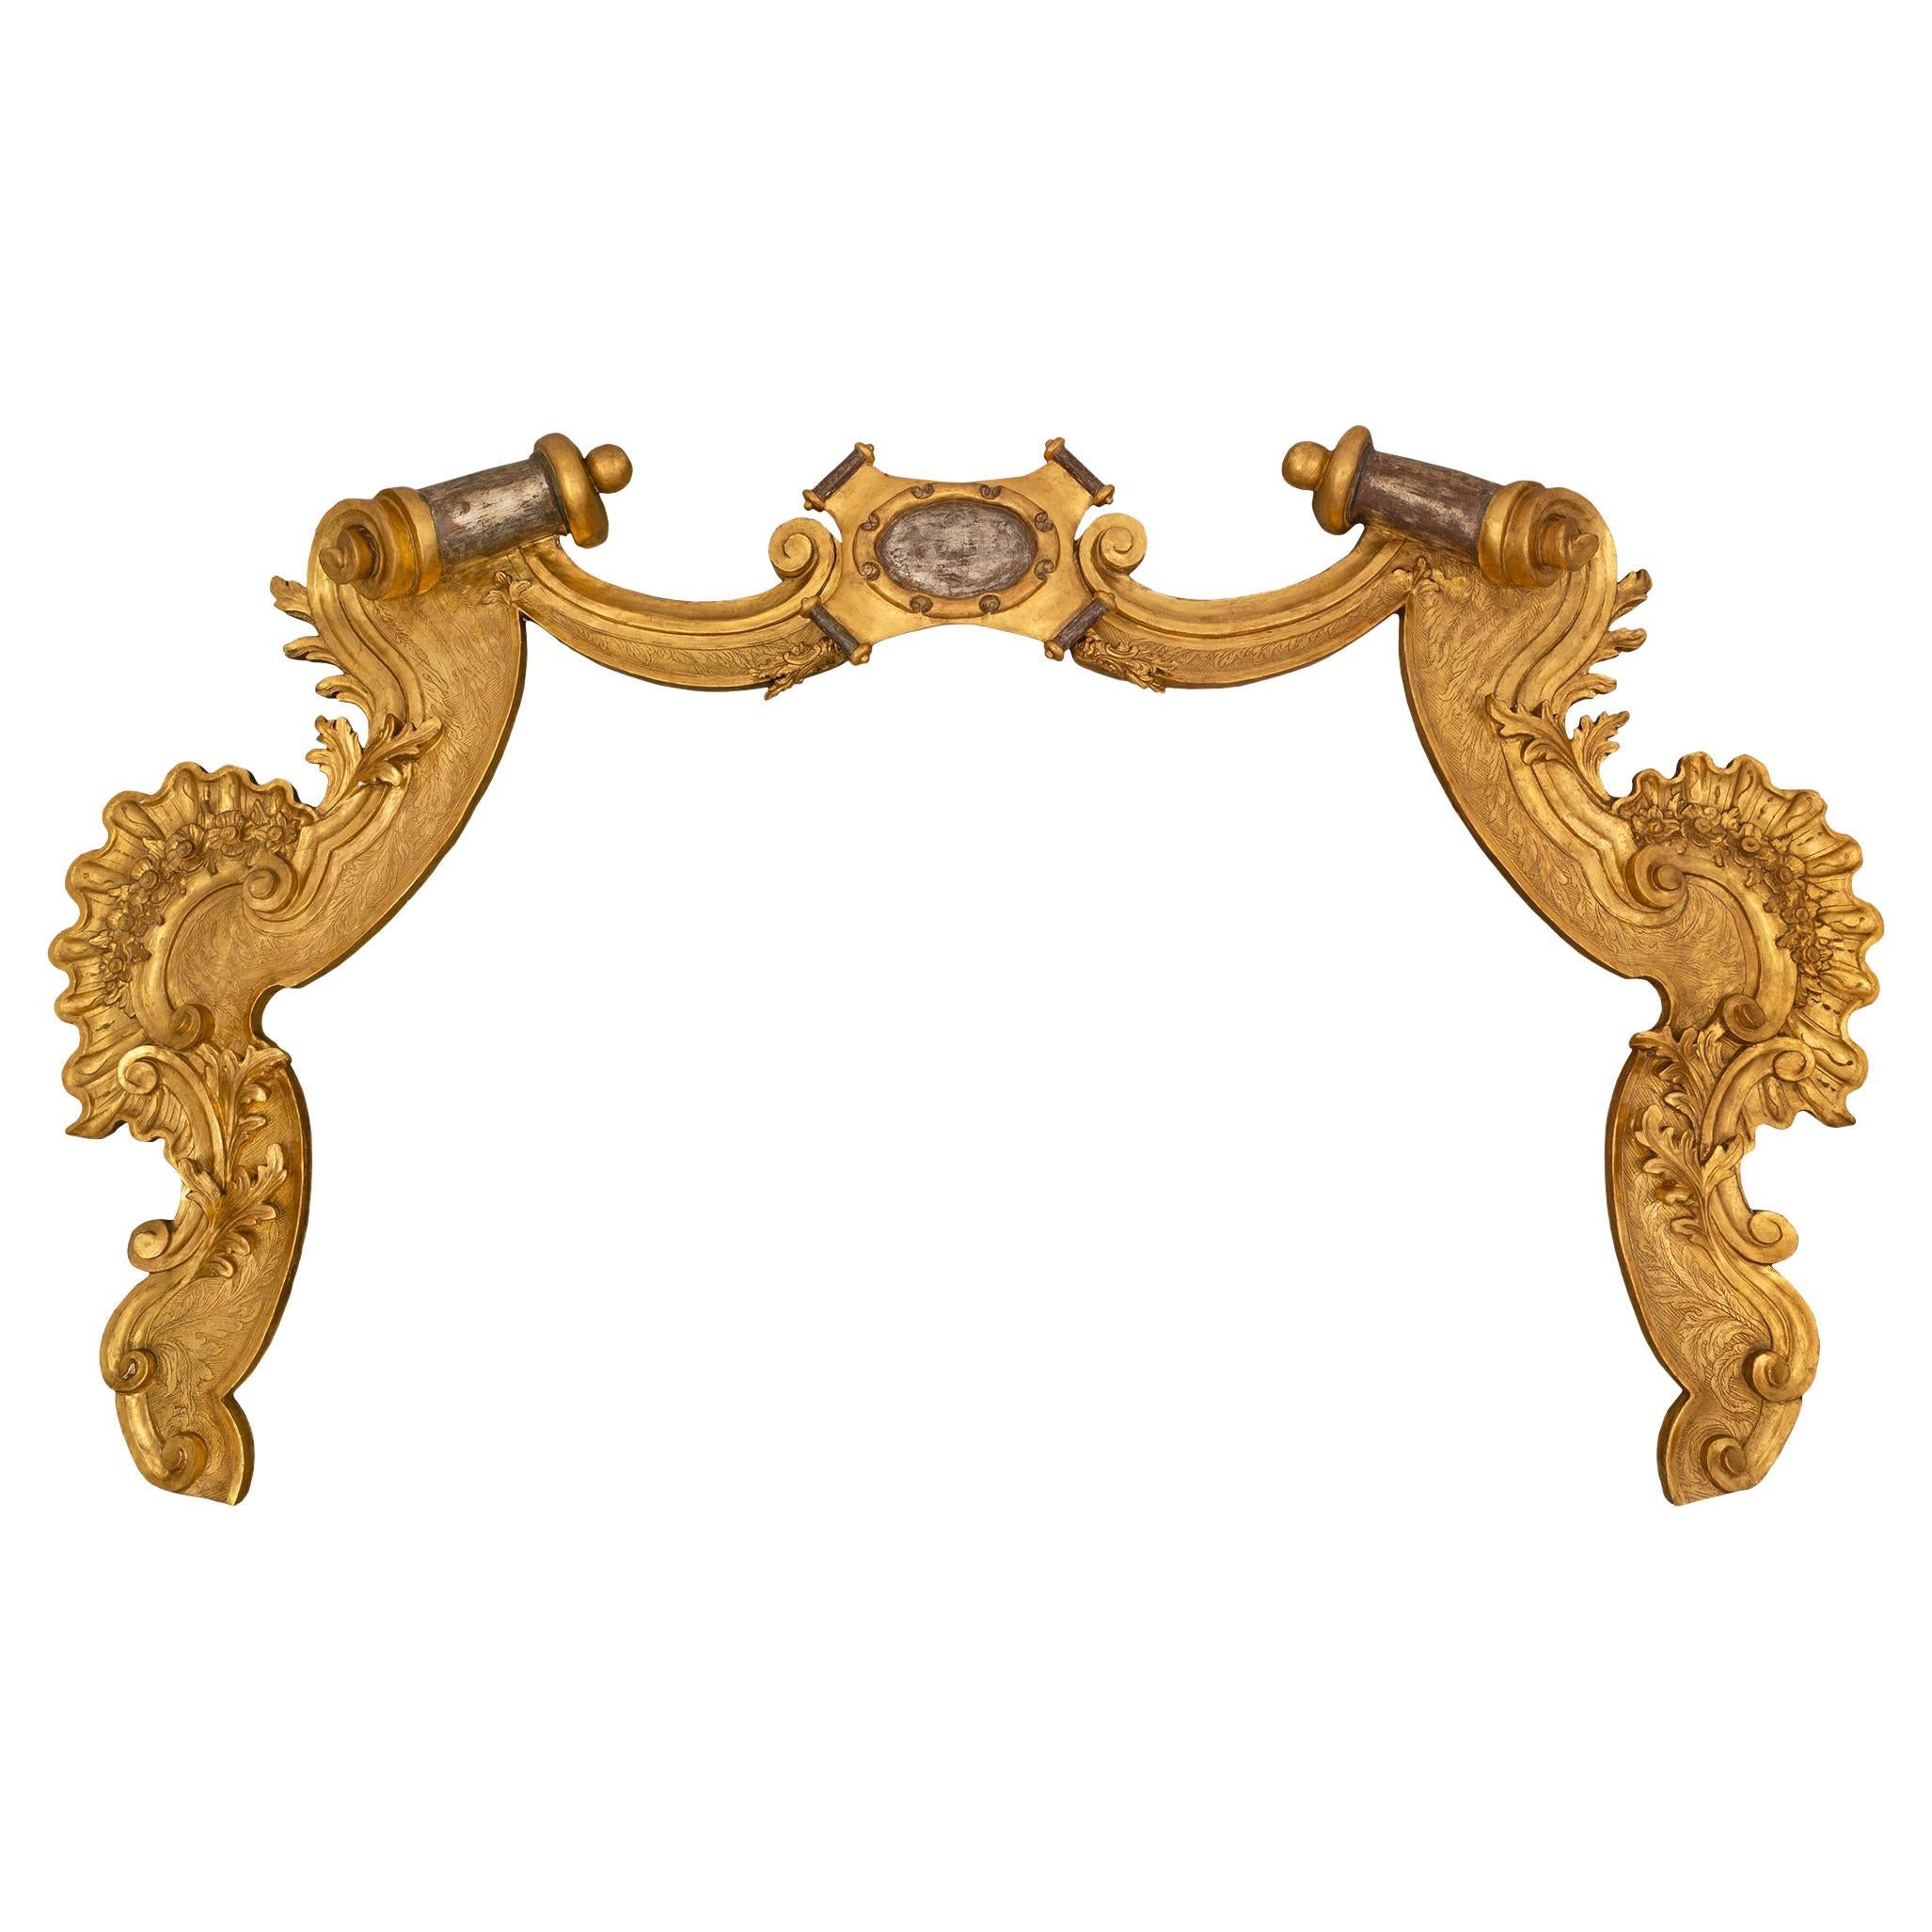 Italian 18th Century Giltwood and Mecca Architectural Element